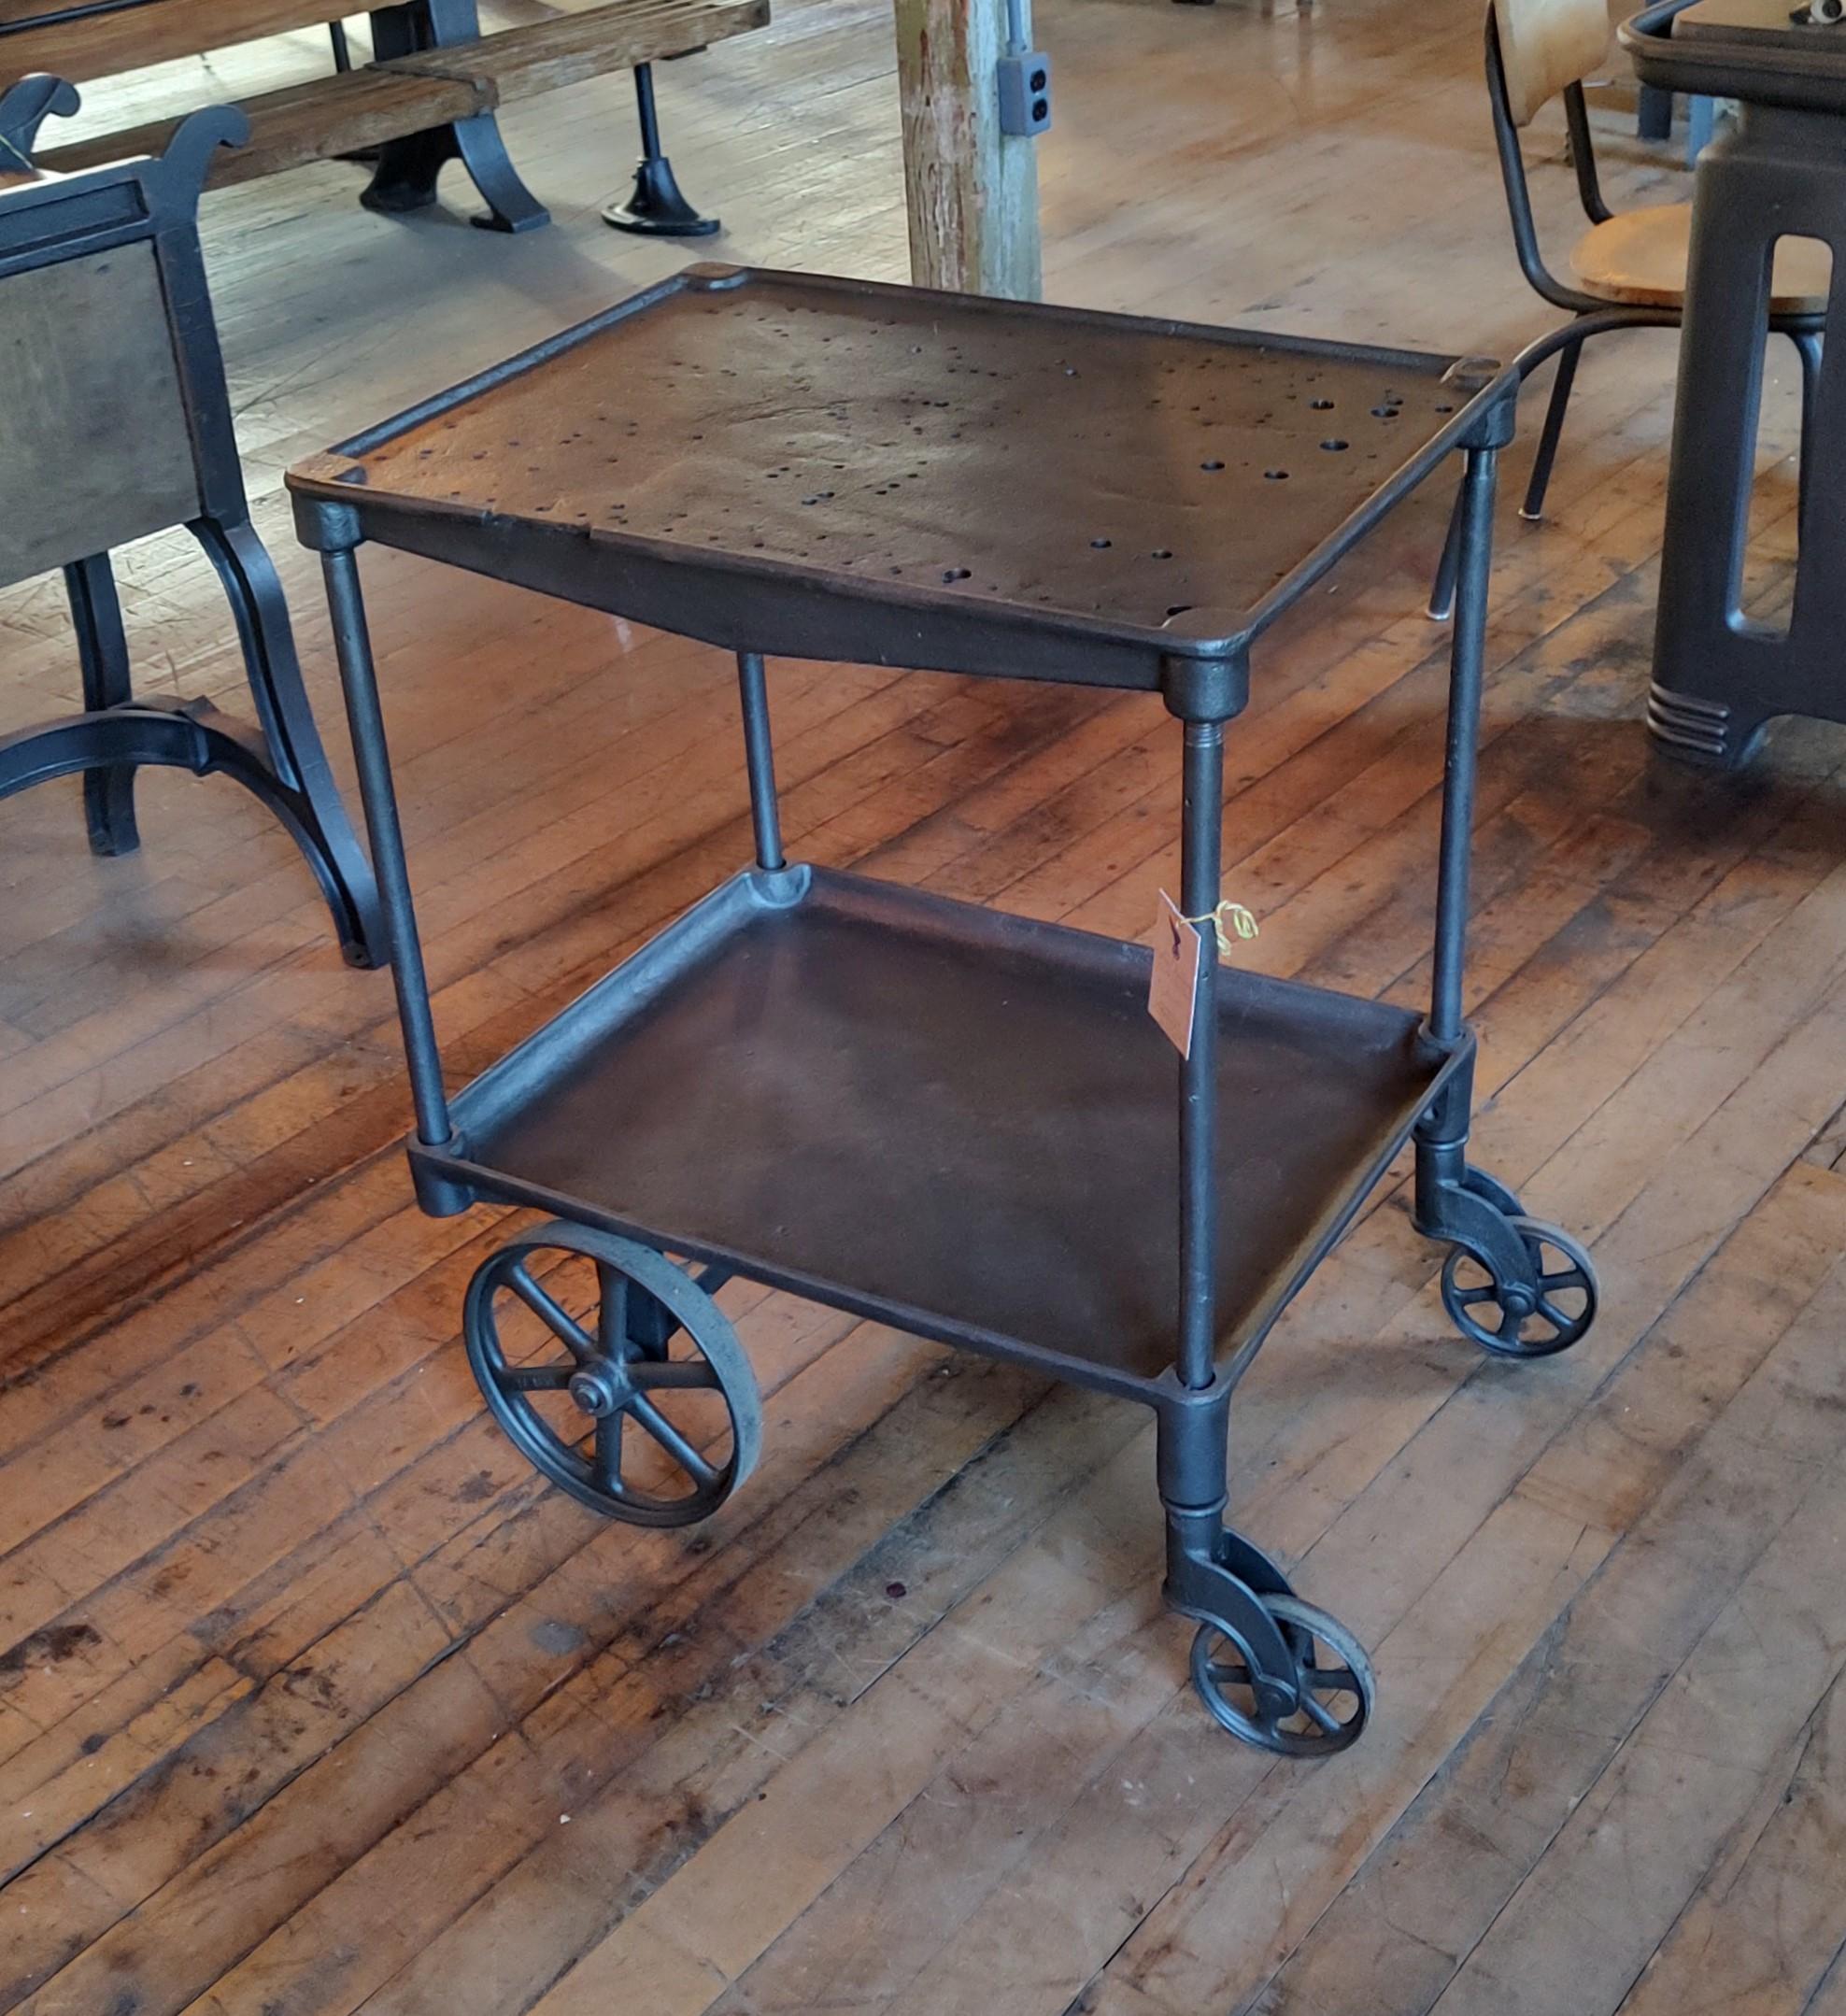 Industrial Machinist's Cart Made by The New Britain Machine Company

Overall Dimensions: 26